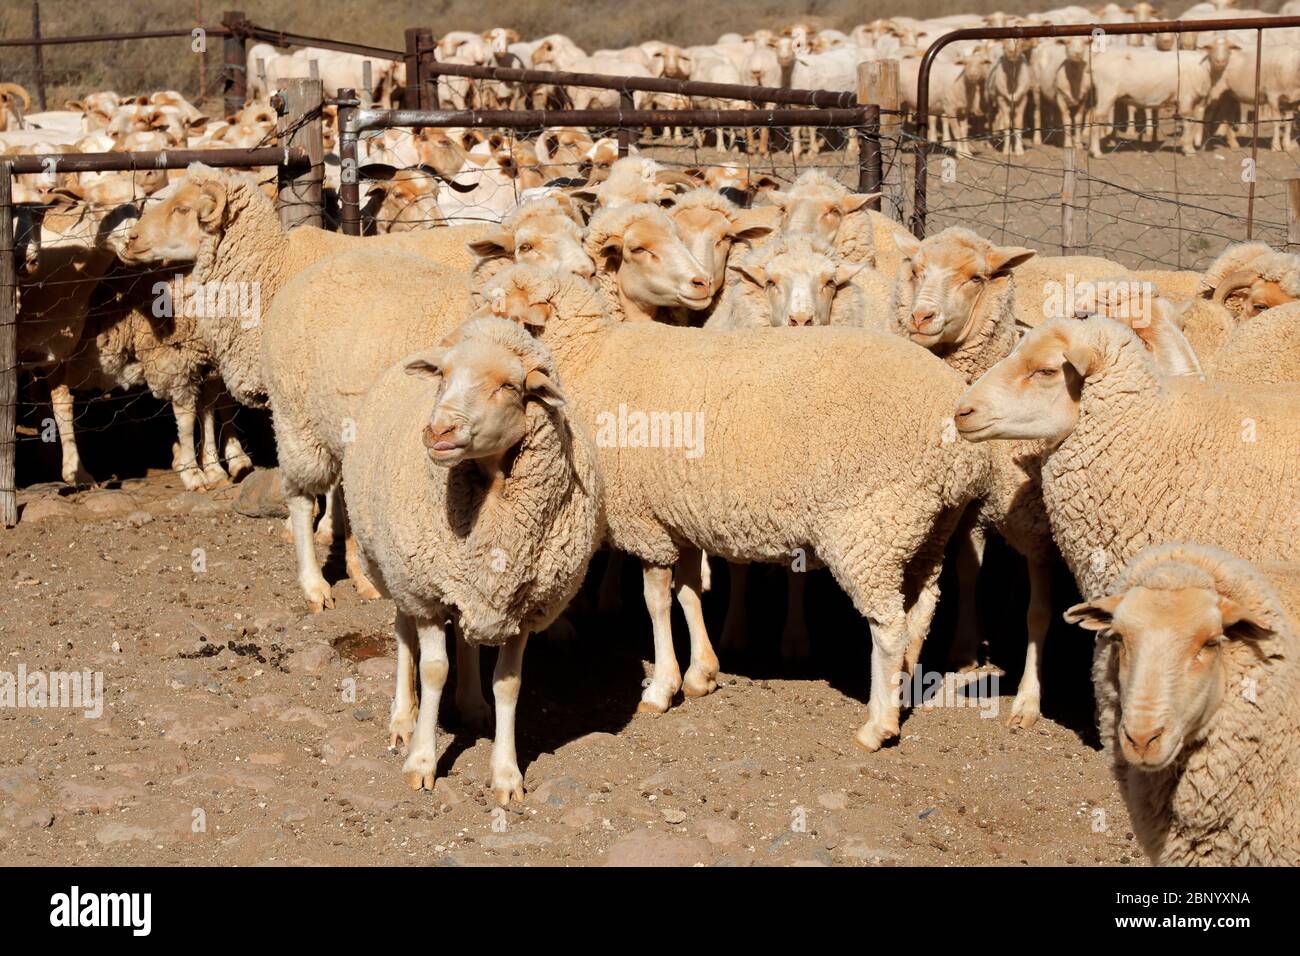 Merino sheep in a paddock on a rural South African farm Stock Photo